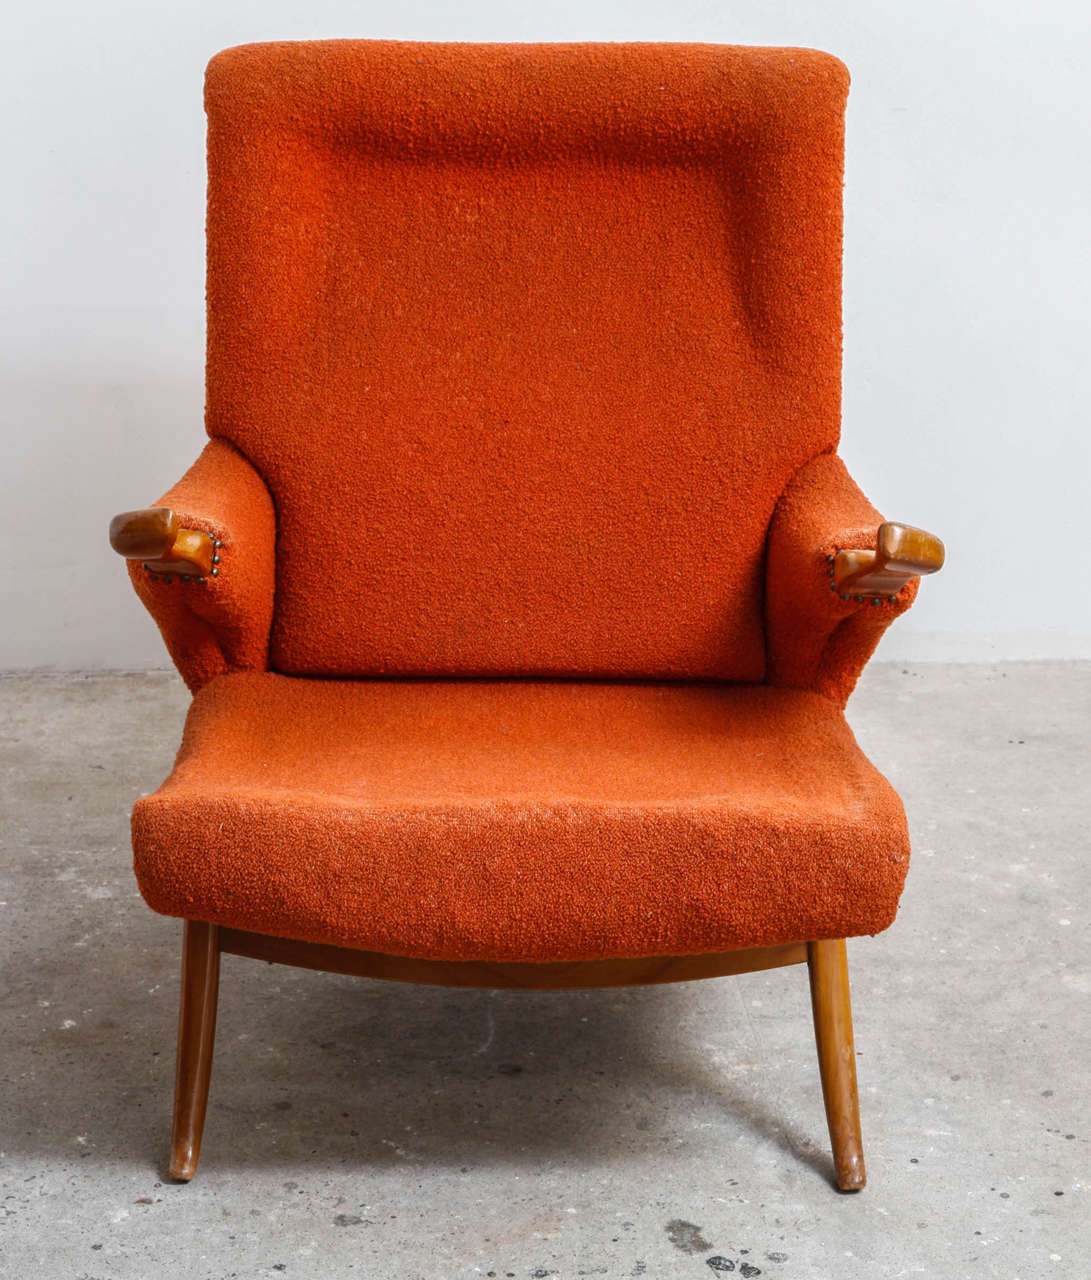 This very rare arm chair in the manner of Dunbar is stunning.
Original orange upholstery,Beech wood.